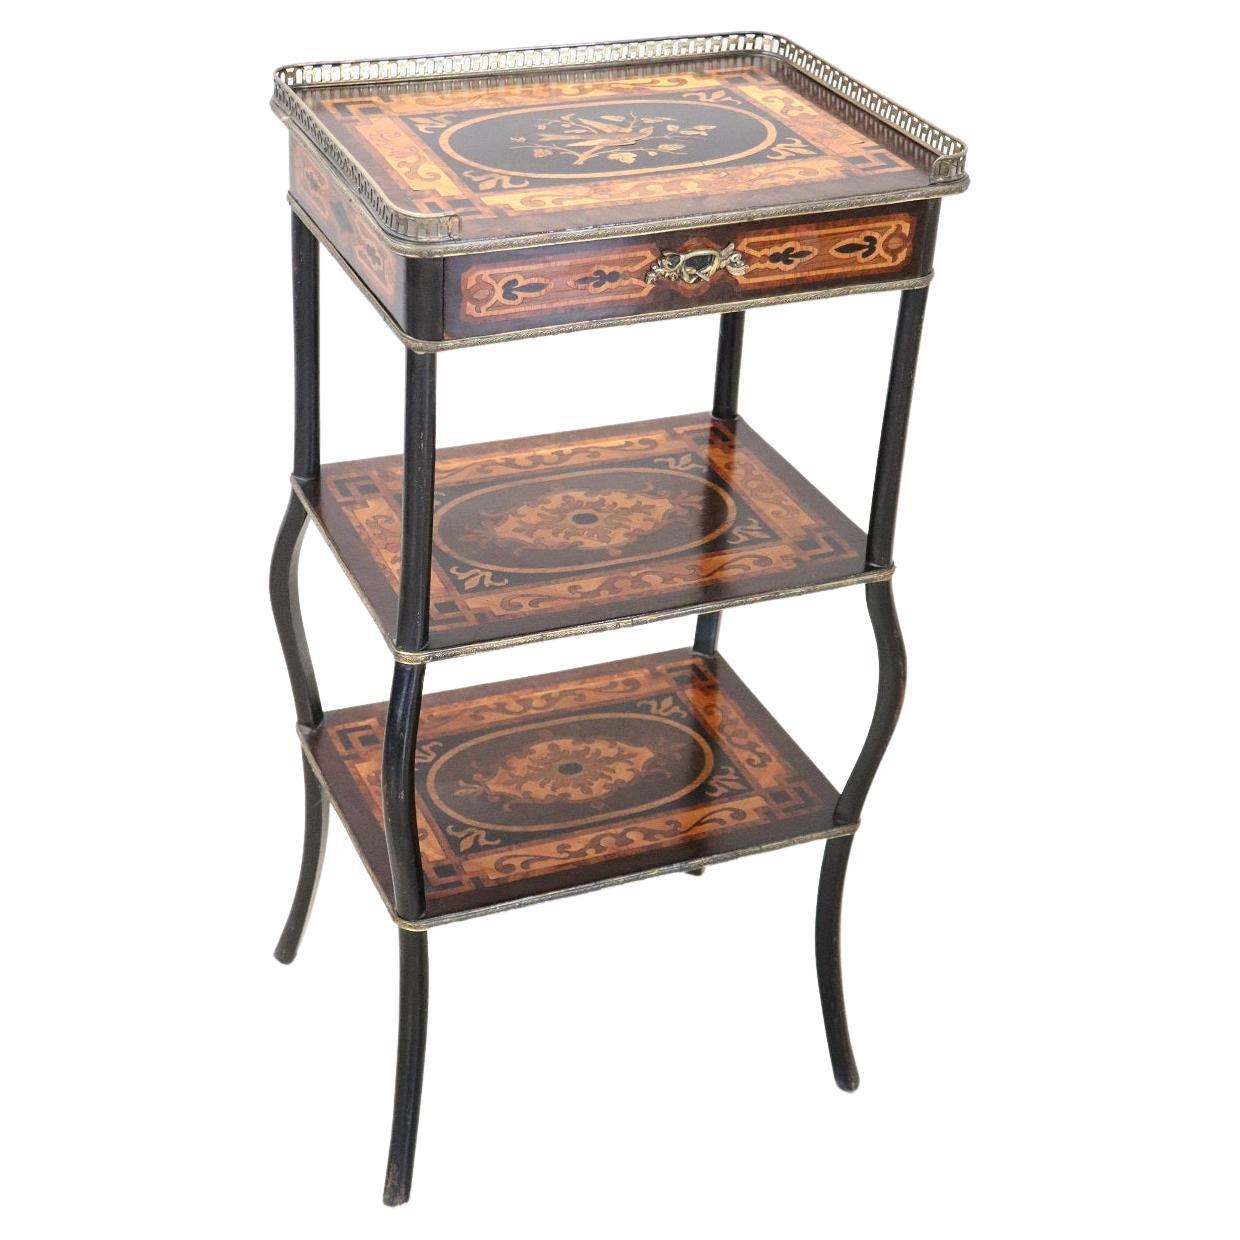 Late 19th Century French Napoleon III Inlaid Wood with Golden Bronzes Side Table